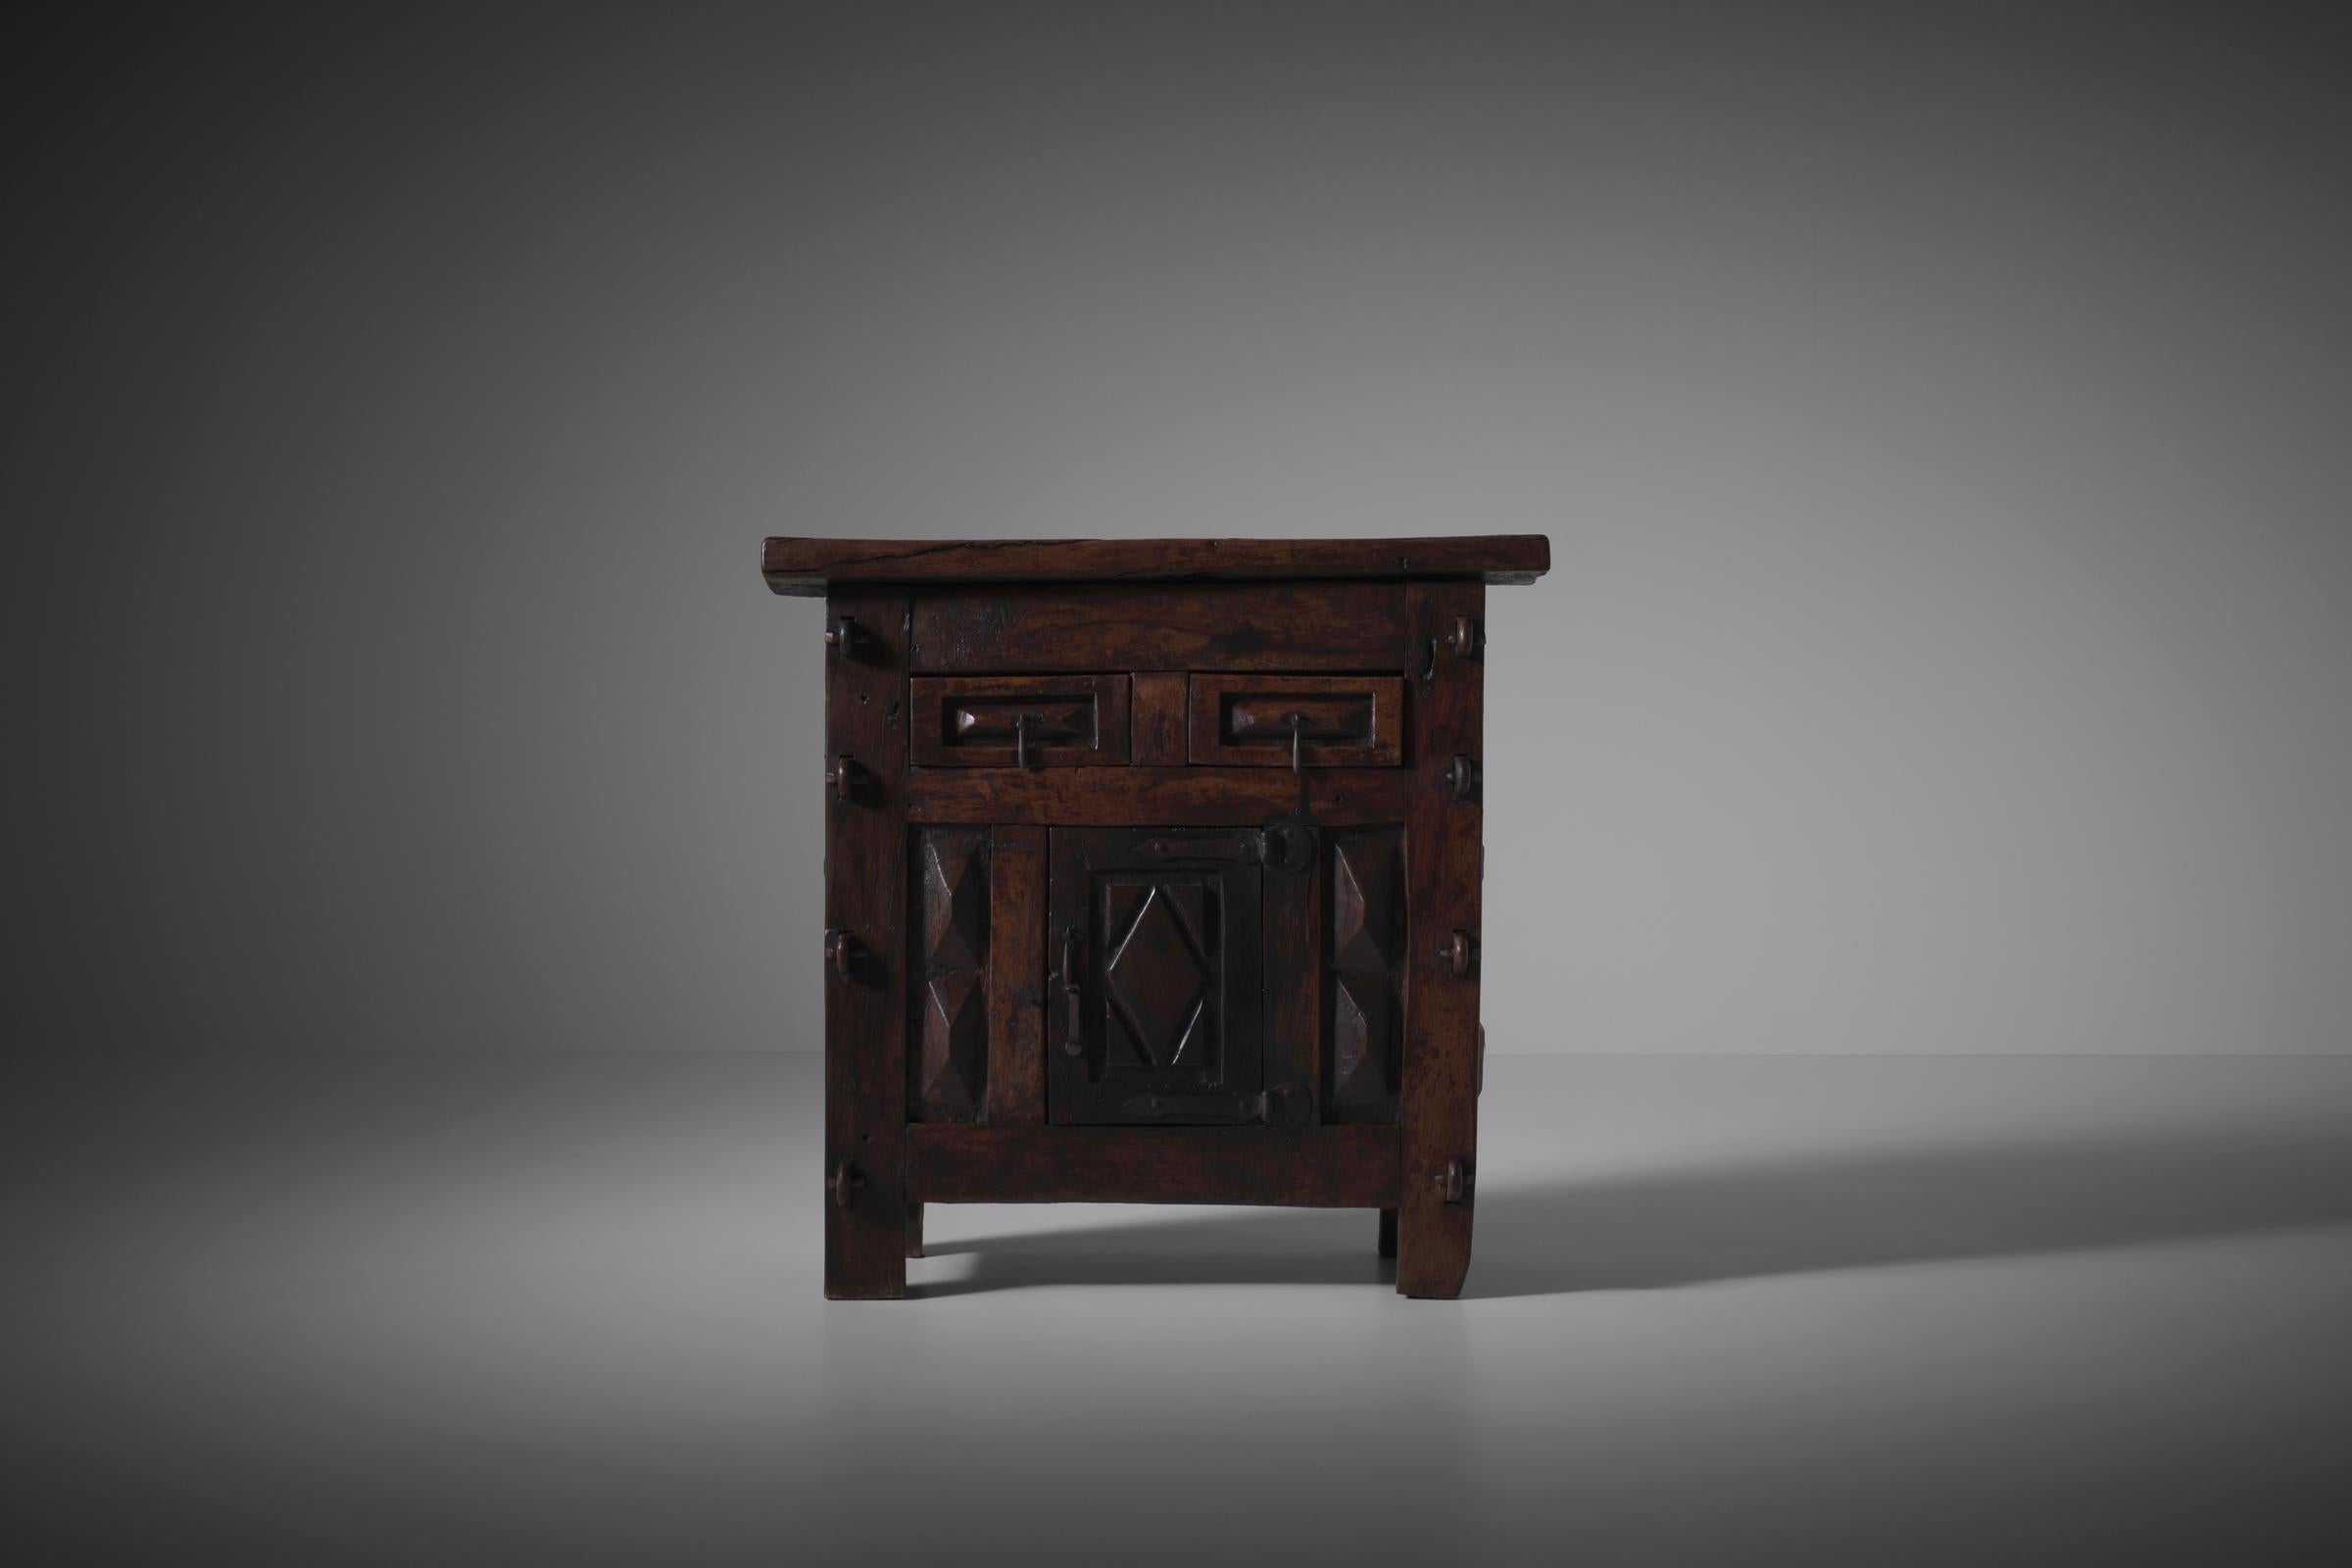 Beautiful Spanish dark wooden cabinet from the 19th century with interesting textured details. All is hand crafted / carved out of solid wood and forged metal such as the primitive yet elegant forged iron handles and hinges. The cabinet offers one